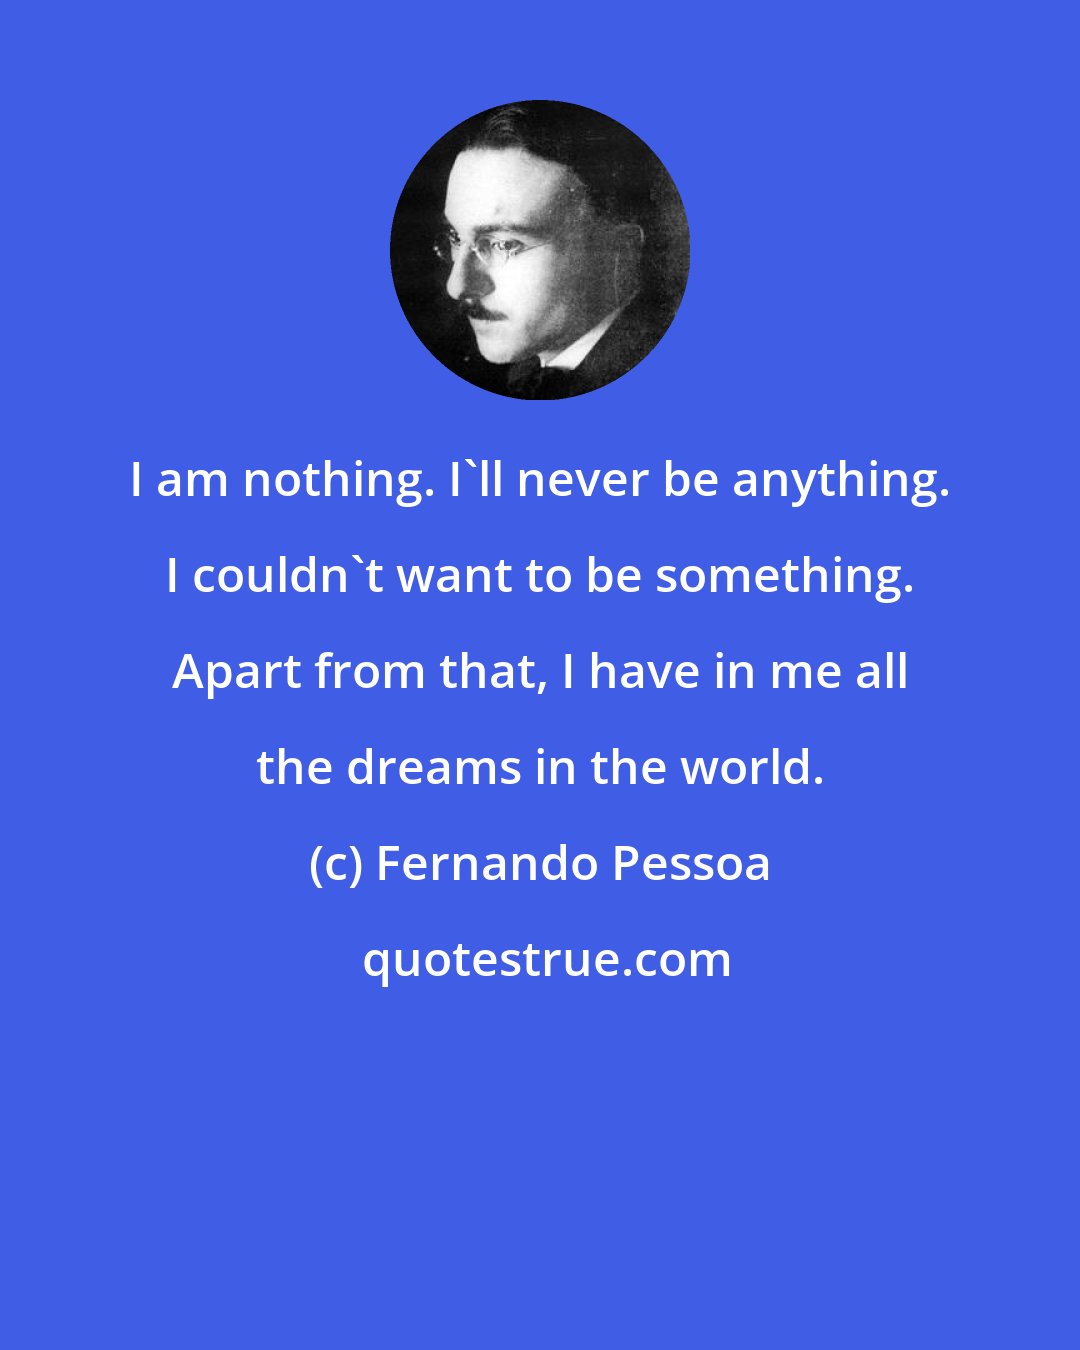 Fernando Pessoa: I am nothing. I'll never be anything. I couldn't want to be something. Apart from that, I have in me all the dreams in the world.